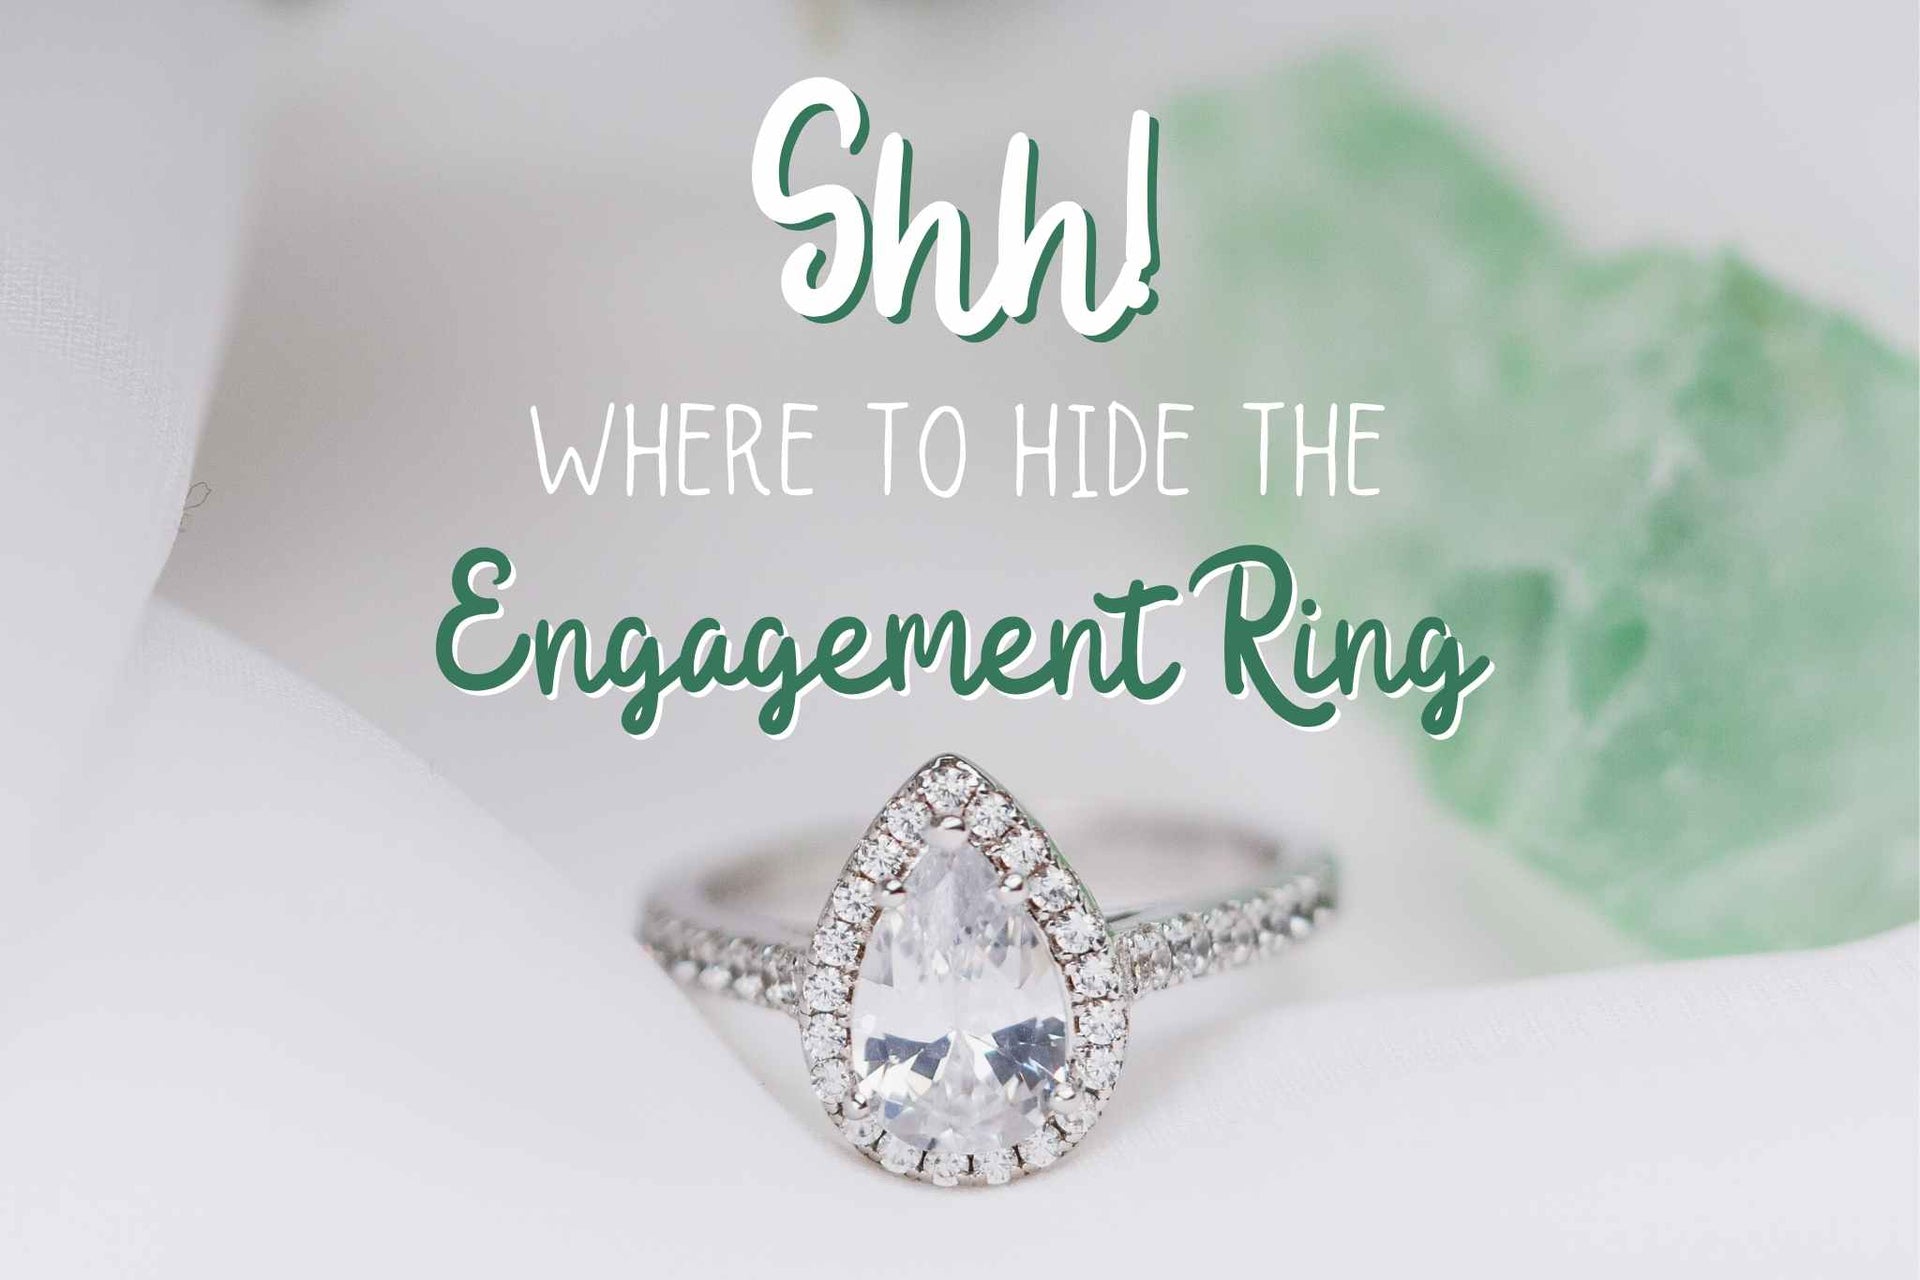 Shh! Where to Hide the Engagement Ring